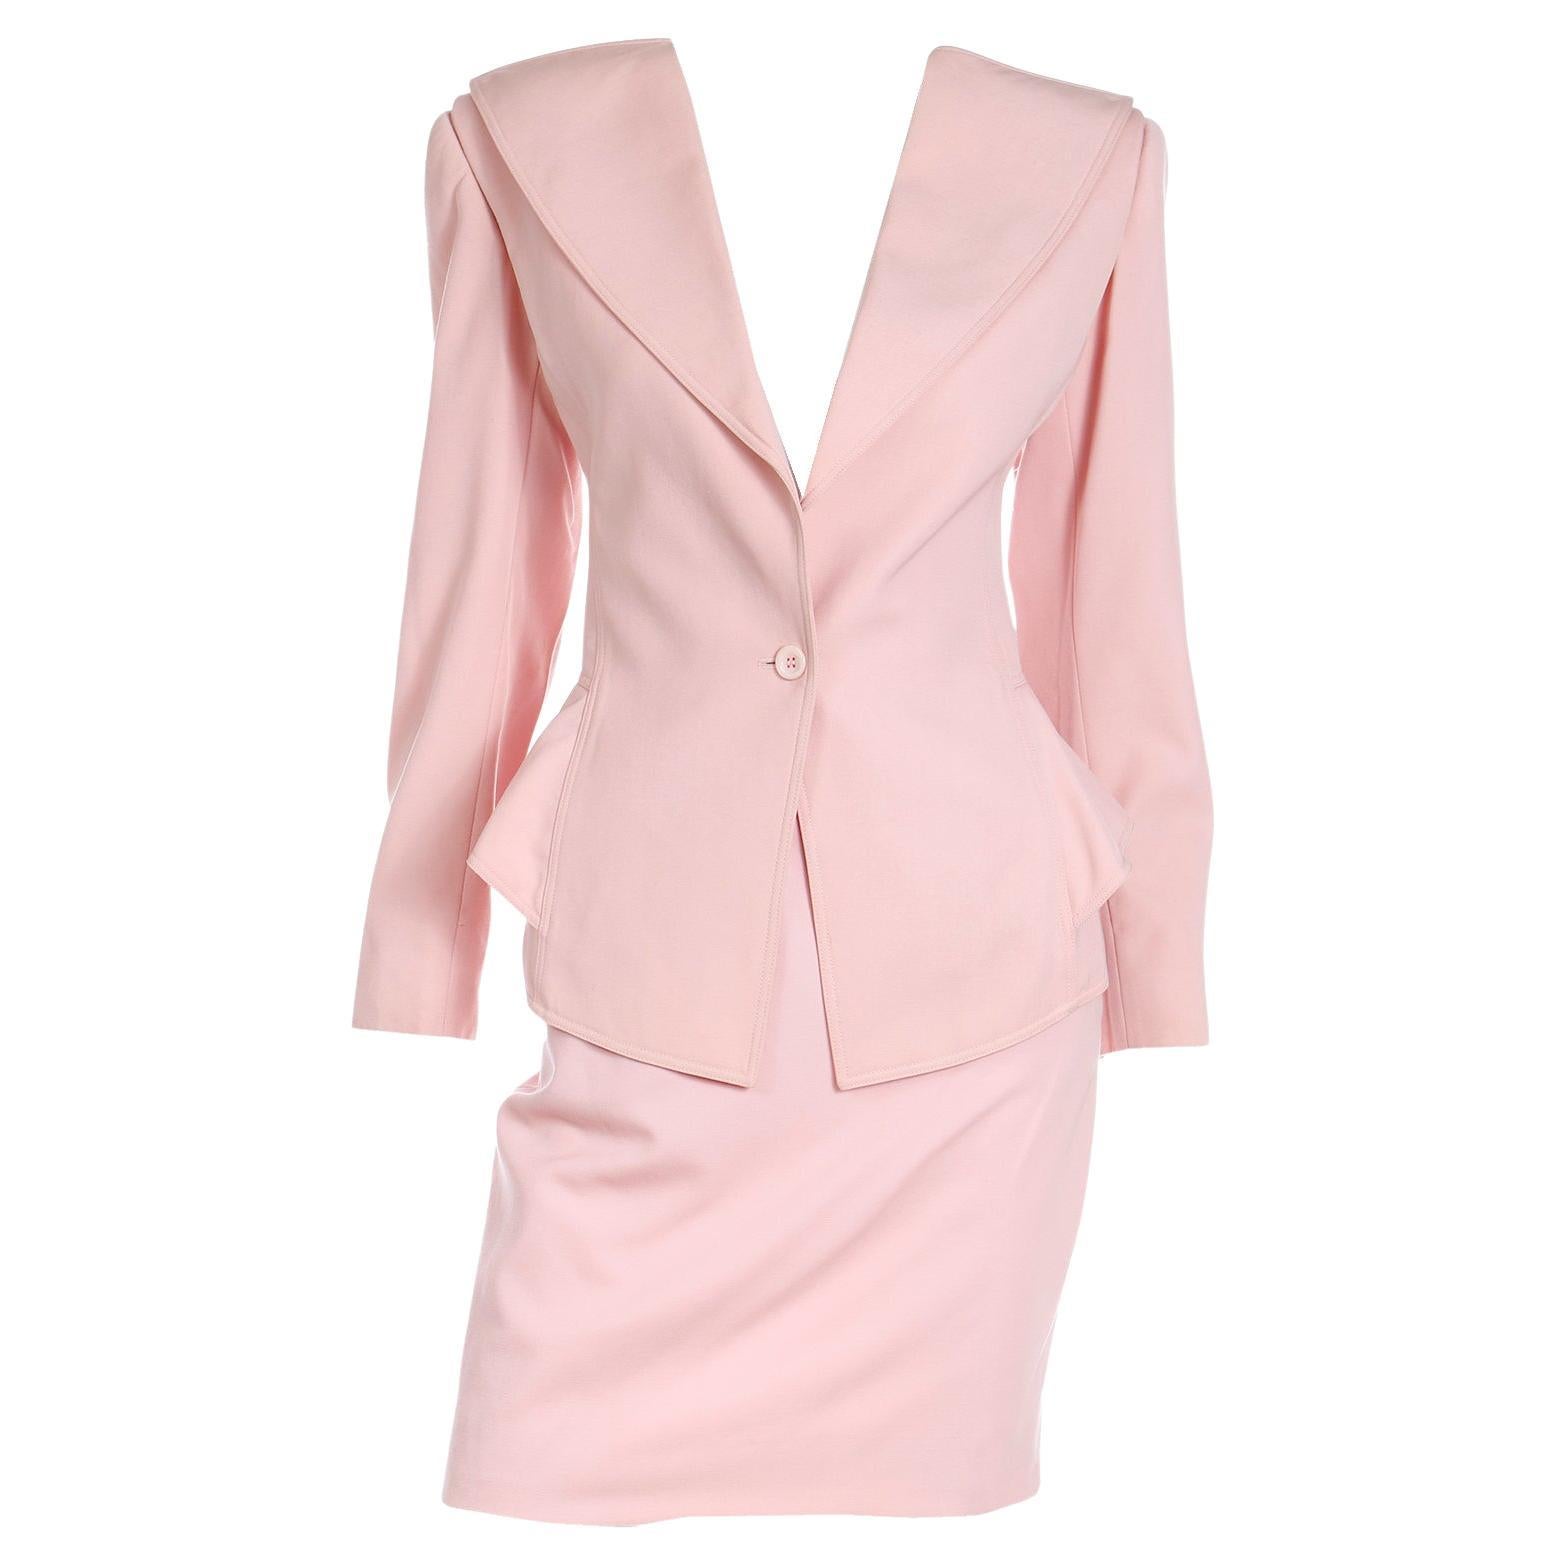 Vintage Ungaro Parallele Pink Peplum Jacket and Pencil Skirt Suit For Sale